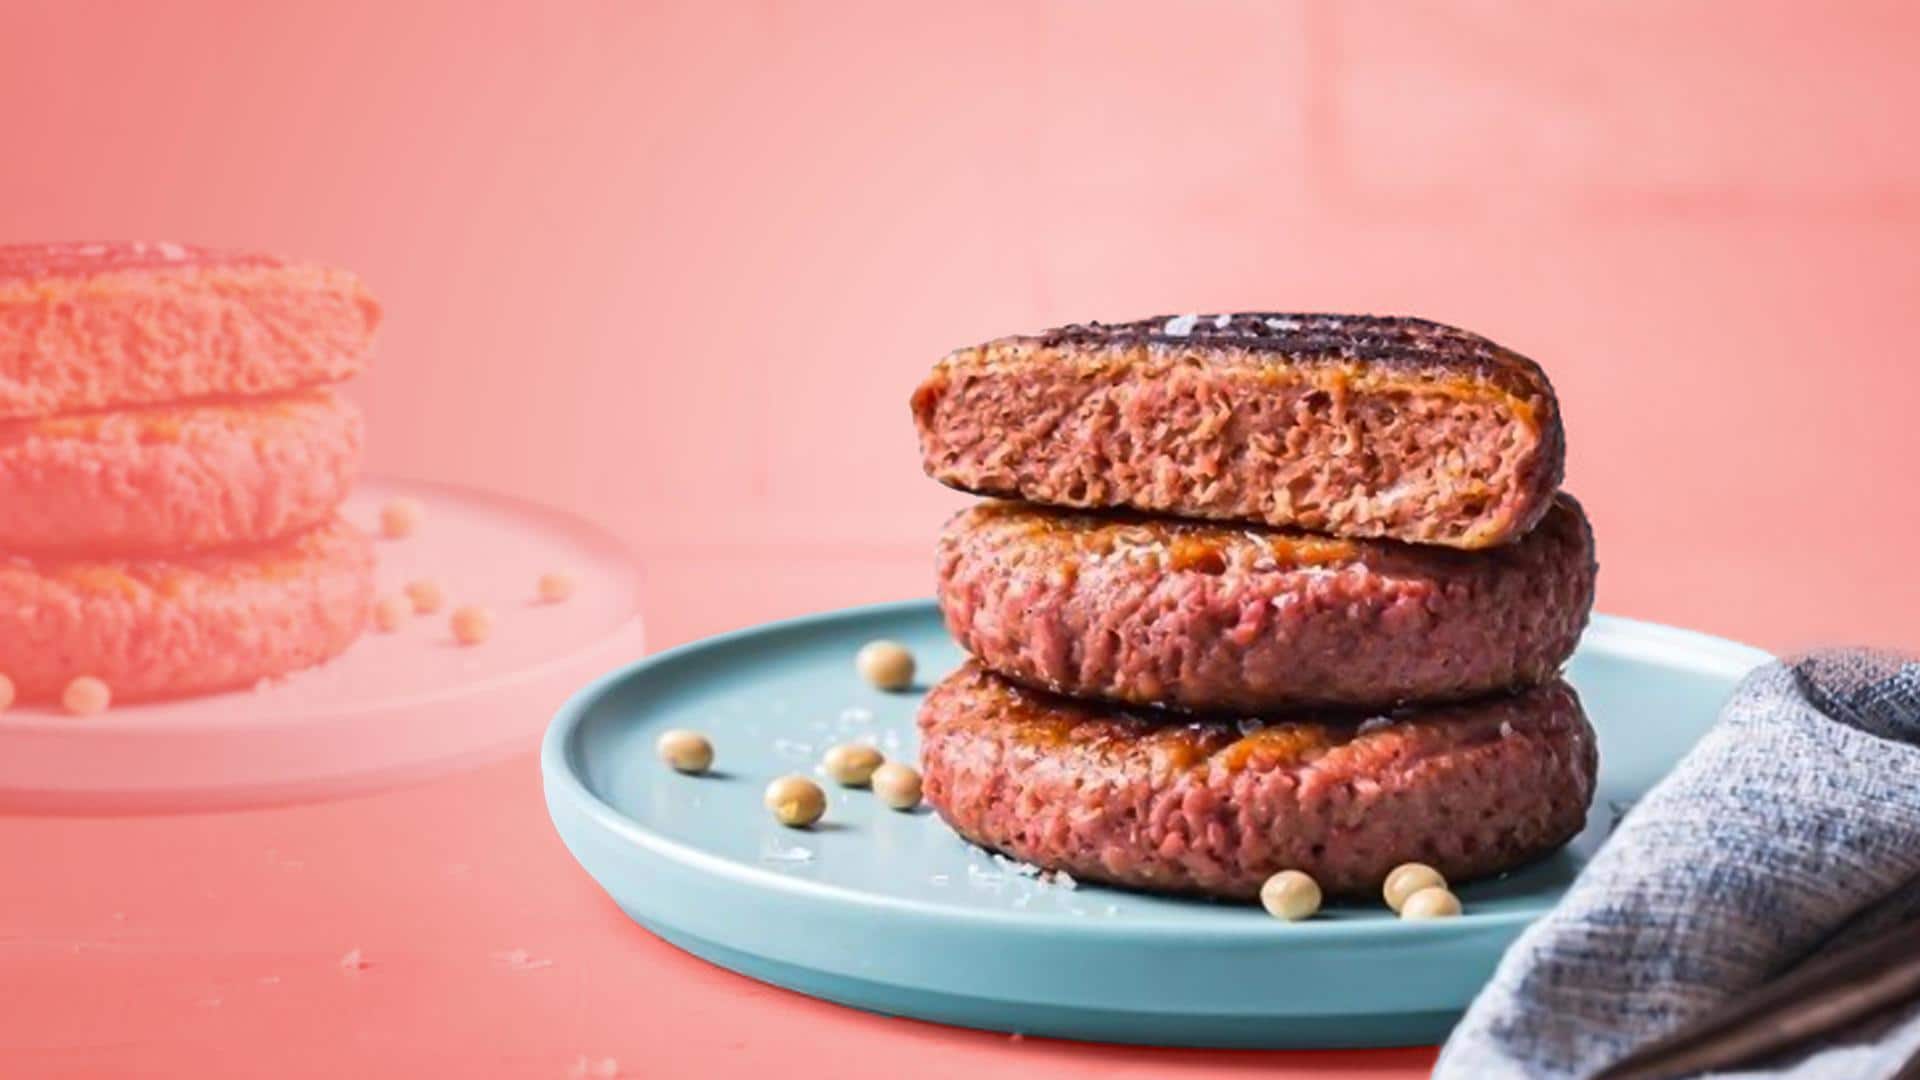 Plant-based meats: Ingredients, benefits, downsides, and myths